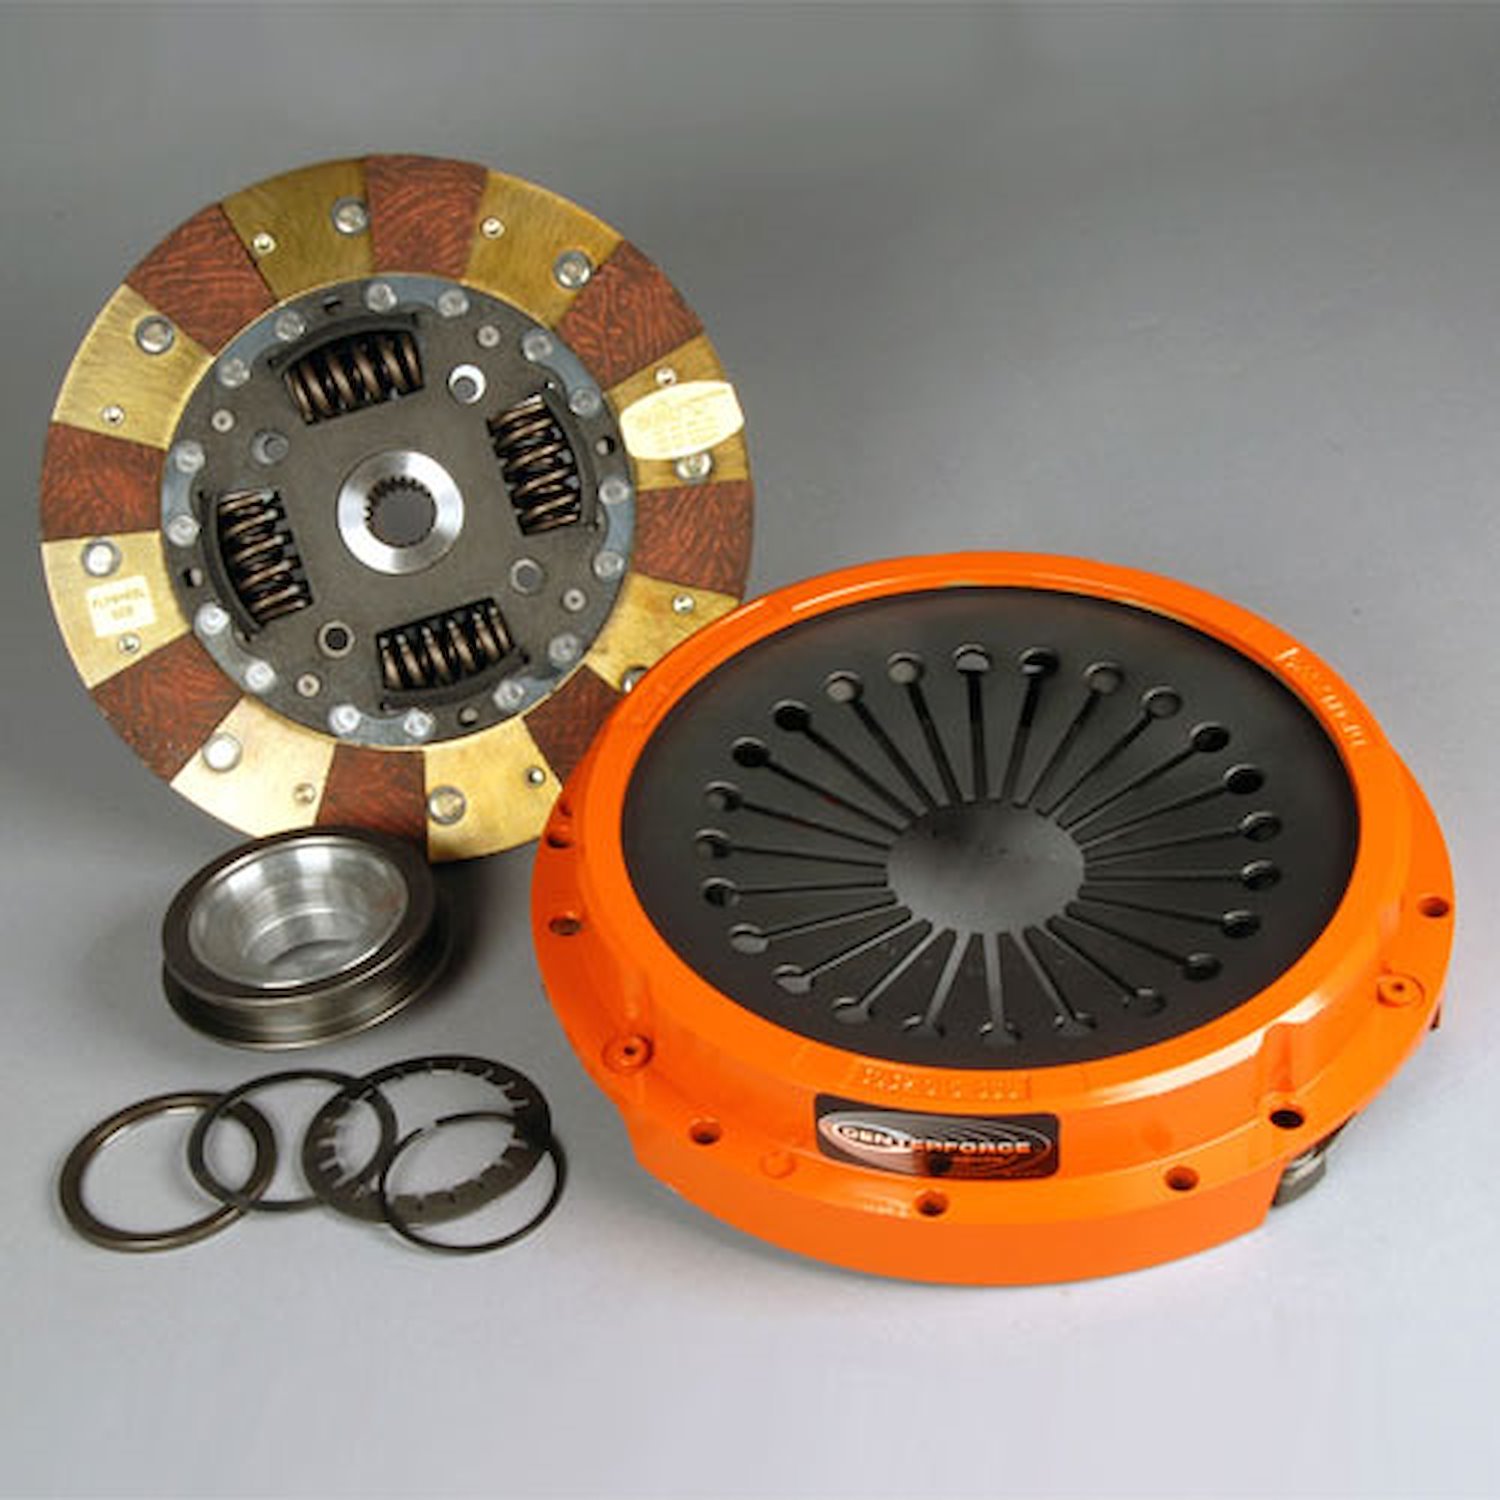 Dual Friction Clutch Includes Pressure Plate, Disc, & Throwout Bearing